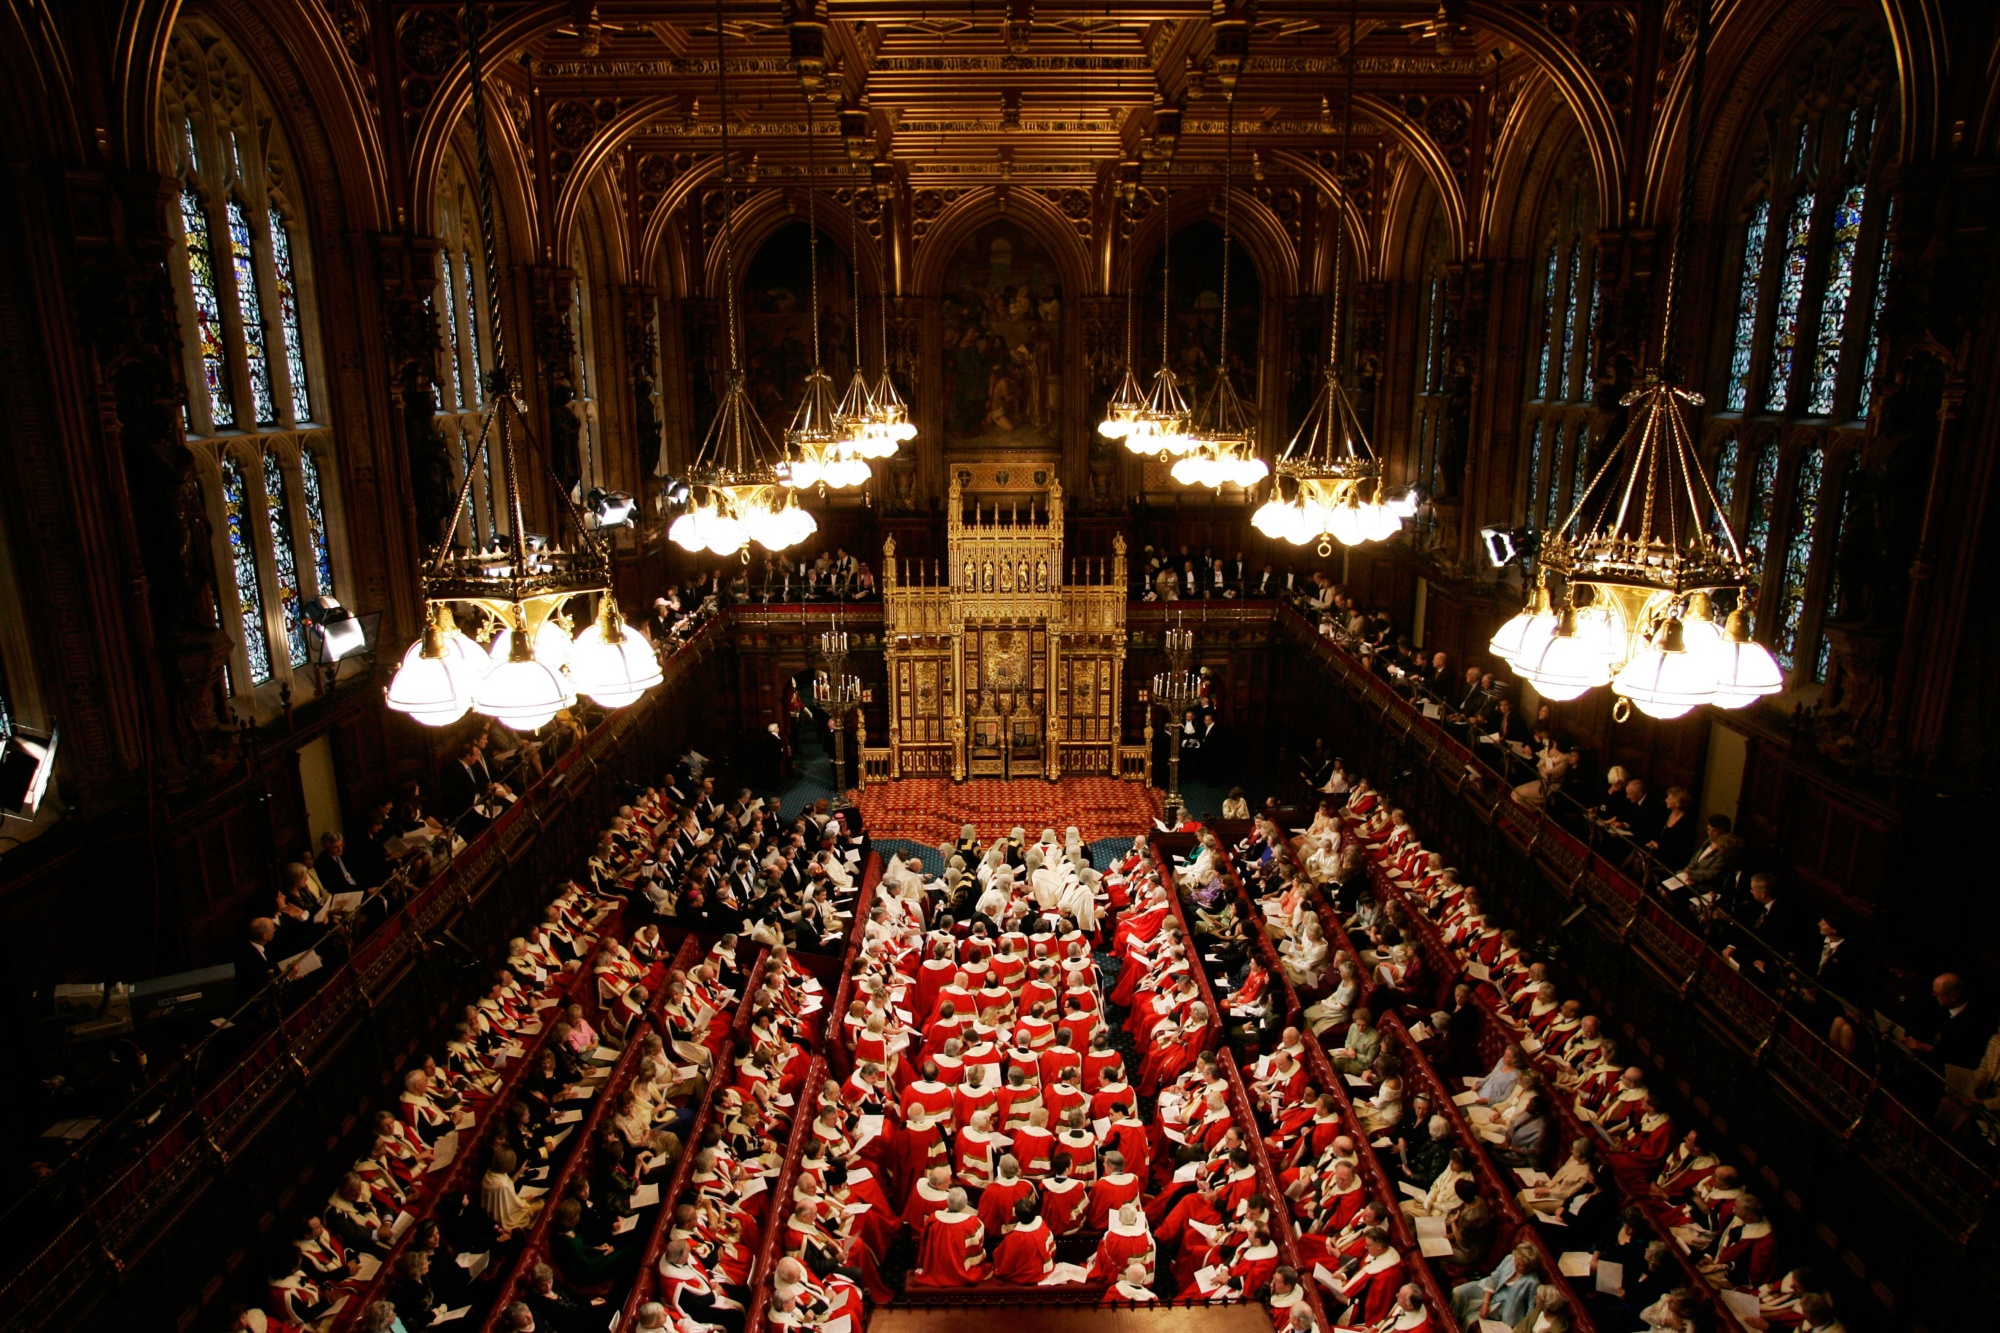 House of Lords catered events - UK Parliament